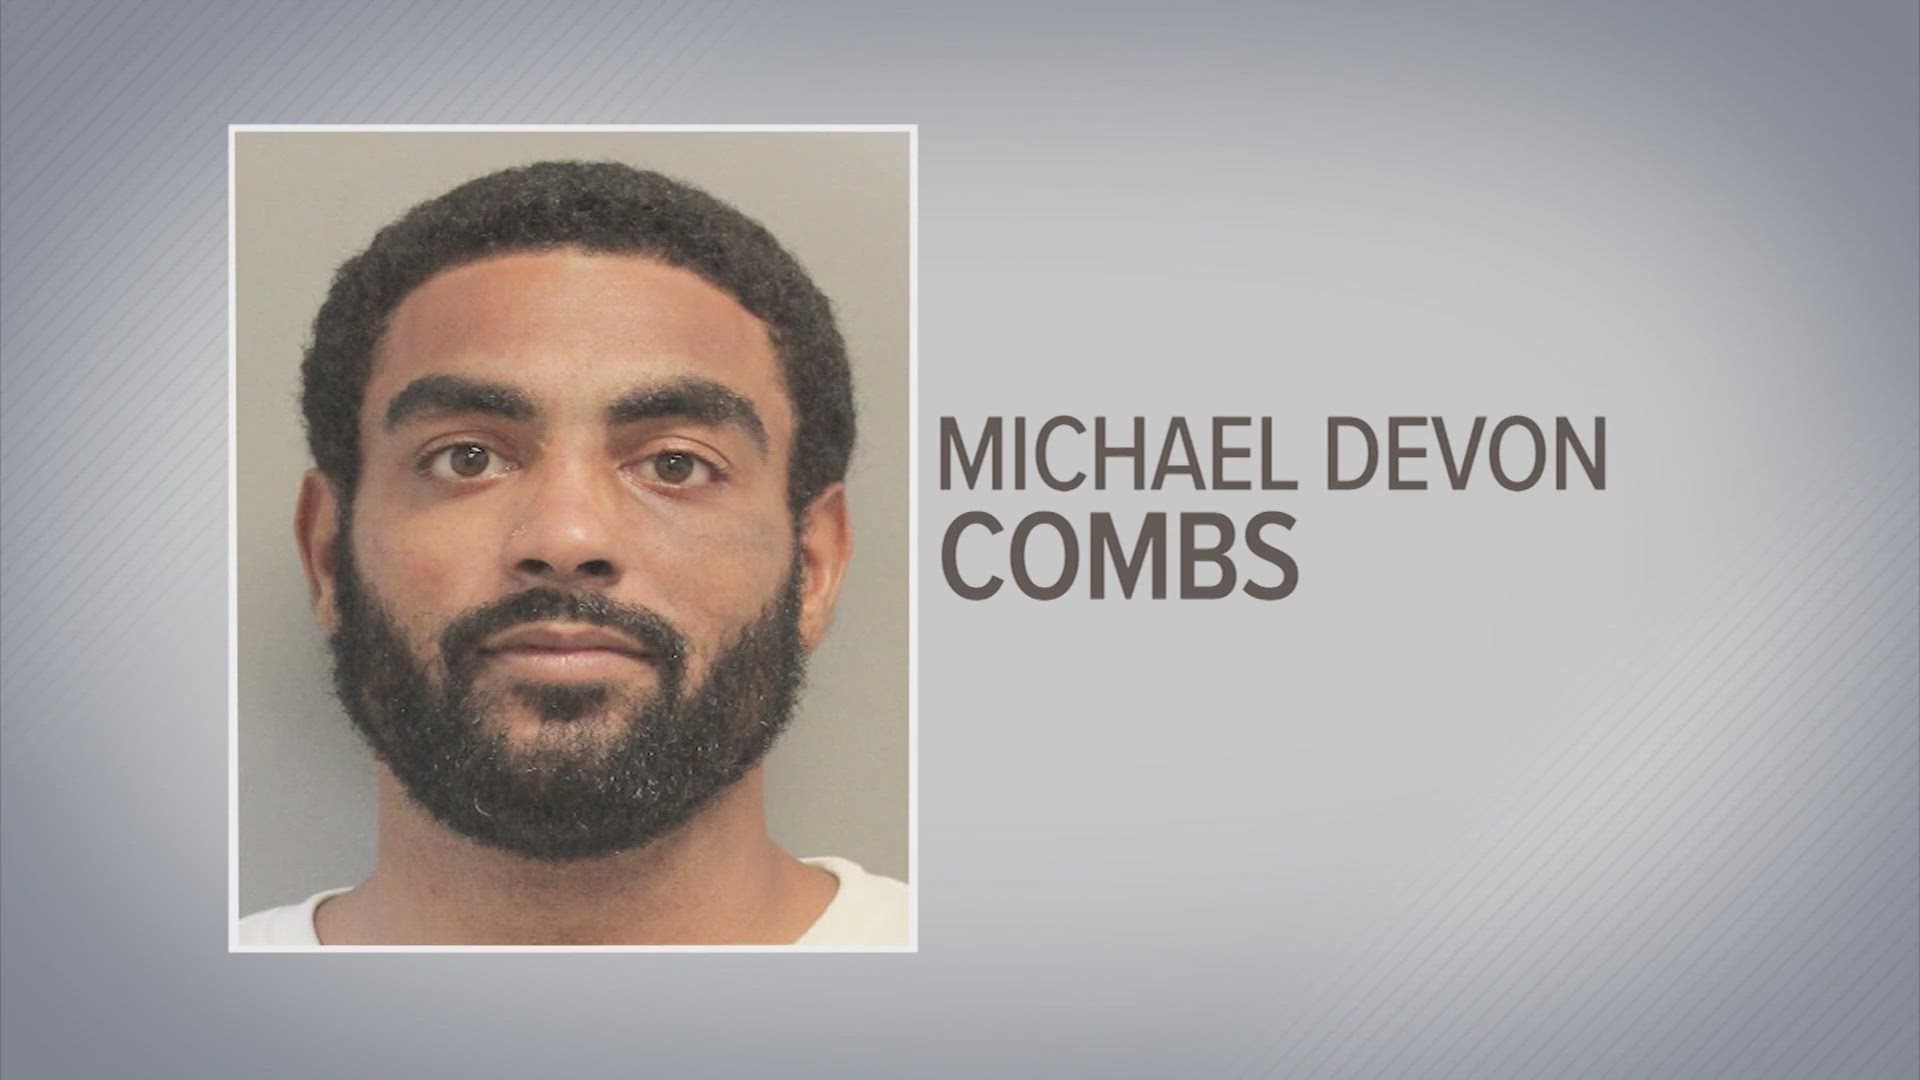 Michael Devon Combs escaped from the Harris County courthouse when a fight broke out in another courtroom on the 19th floor.